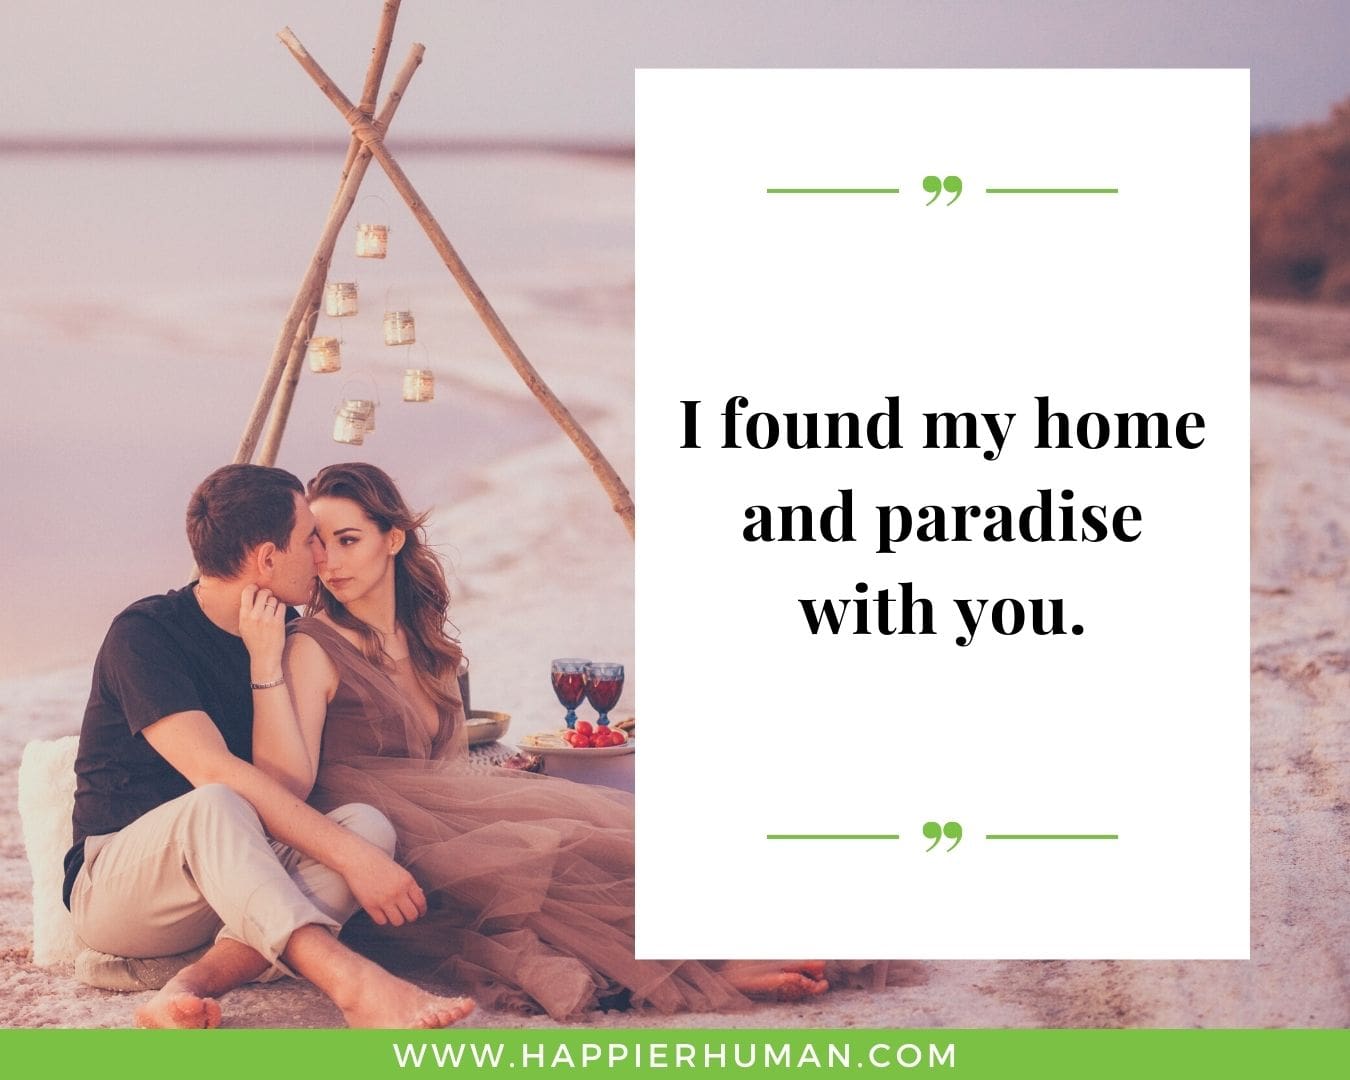 Short, Deep Love and relationship Quotes for Her - “I found my home and paradise with you.”